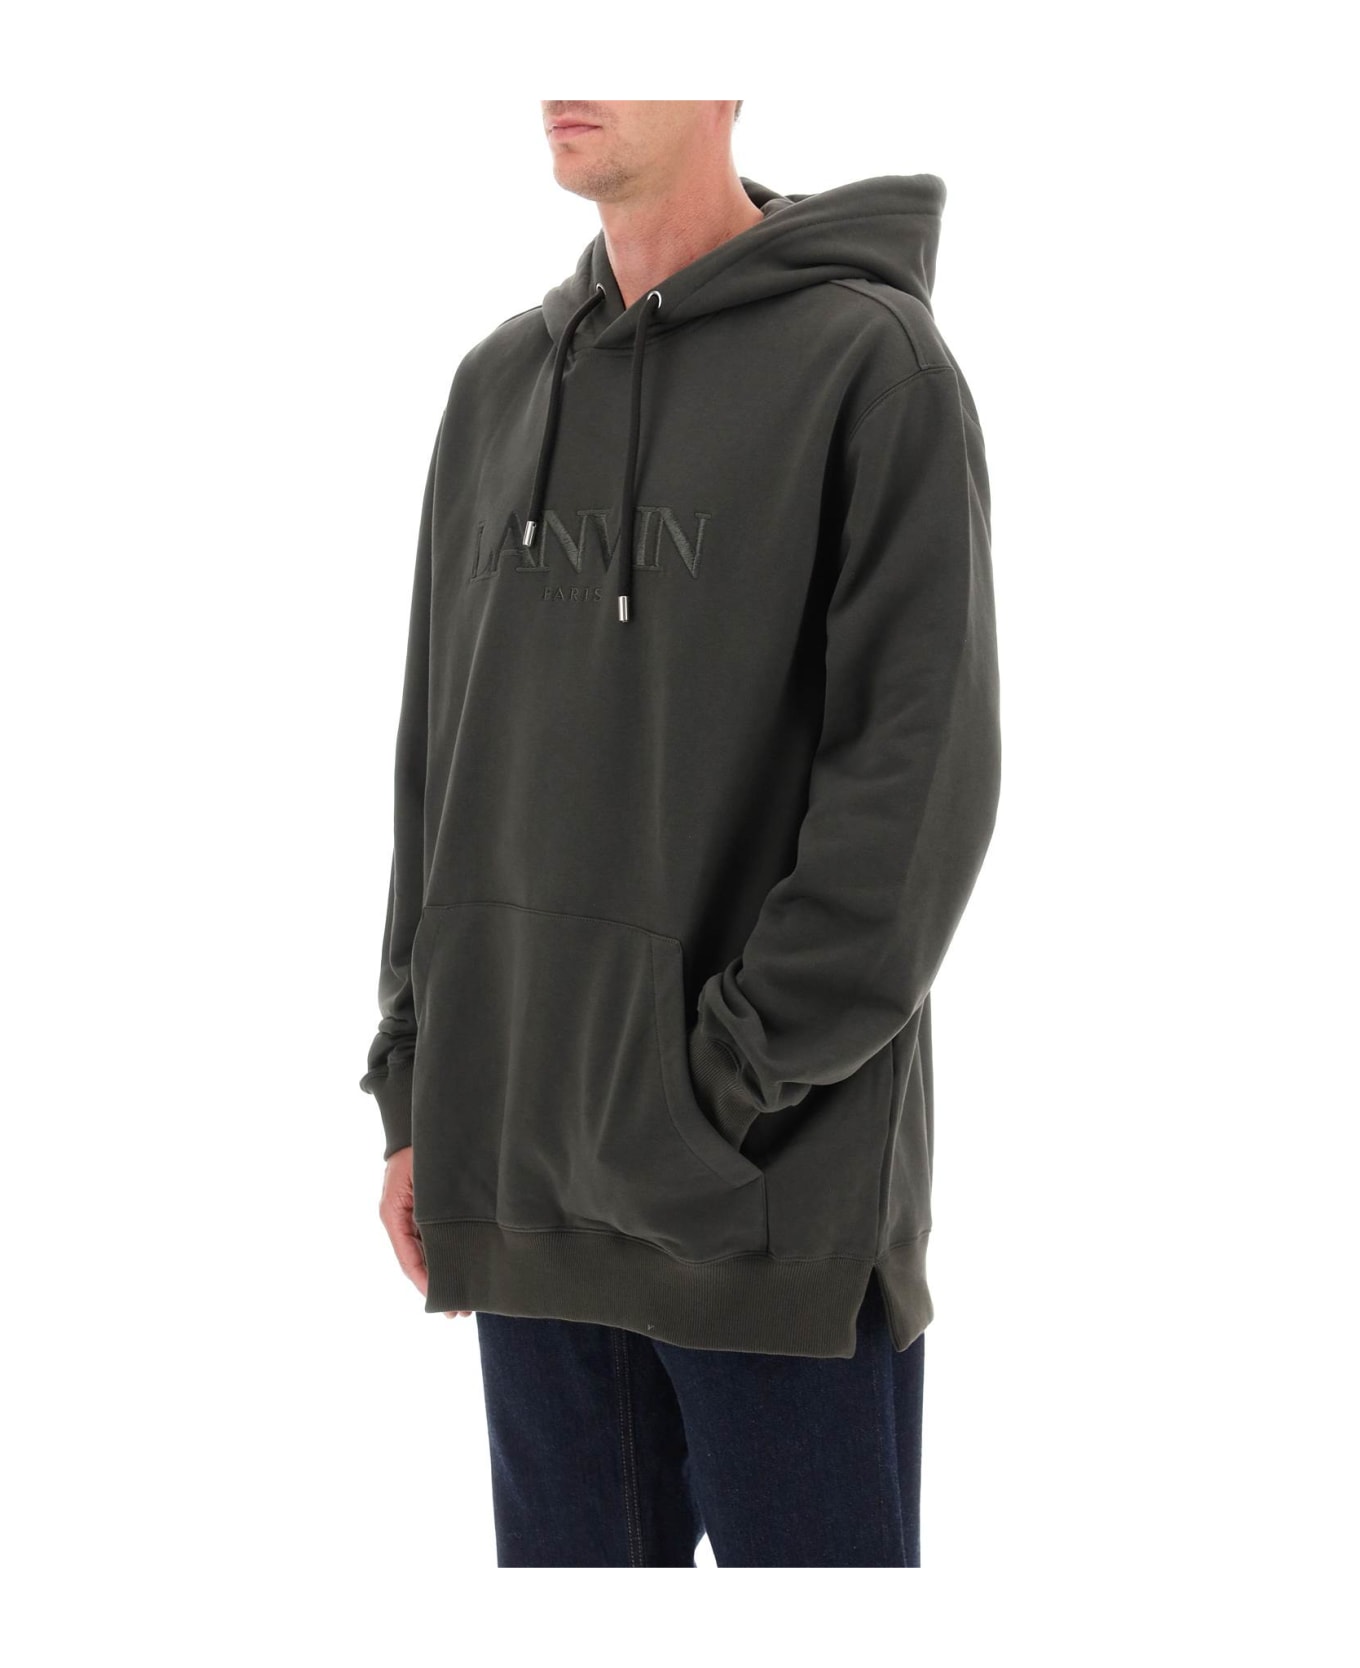 Lanvin Hoodie With Curb Embroidery - GREY